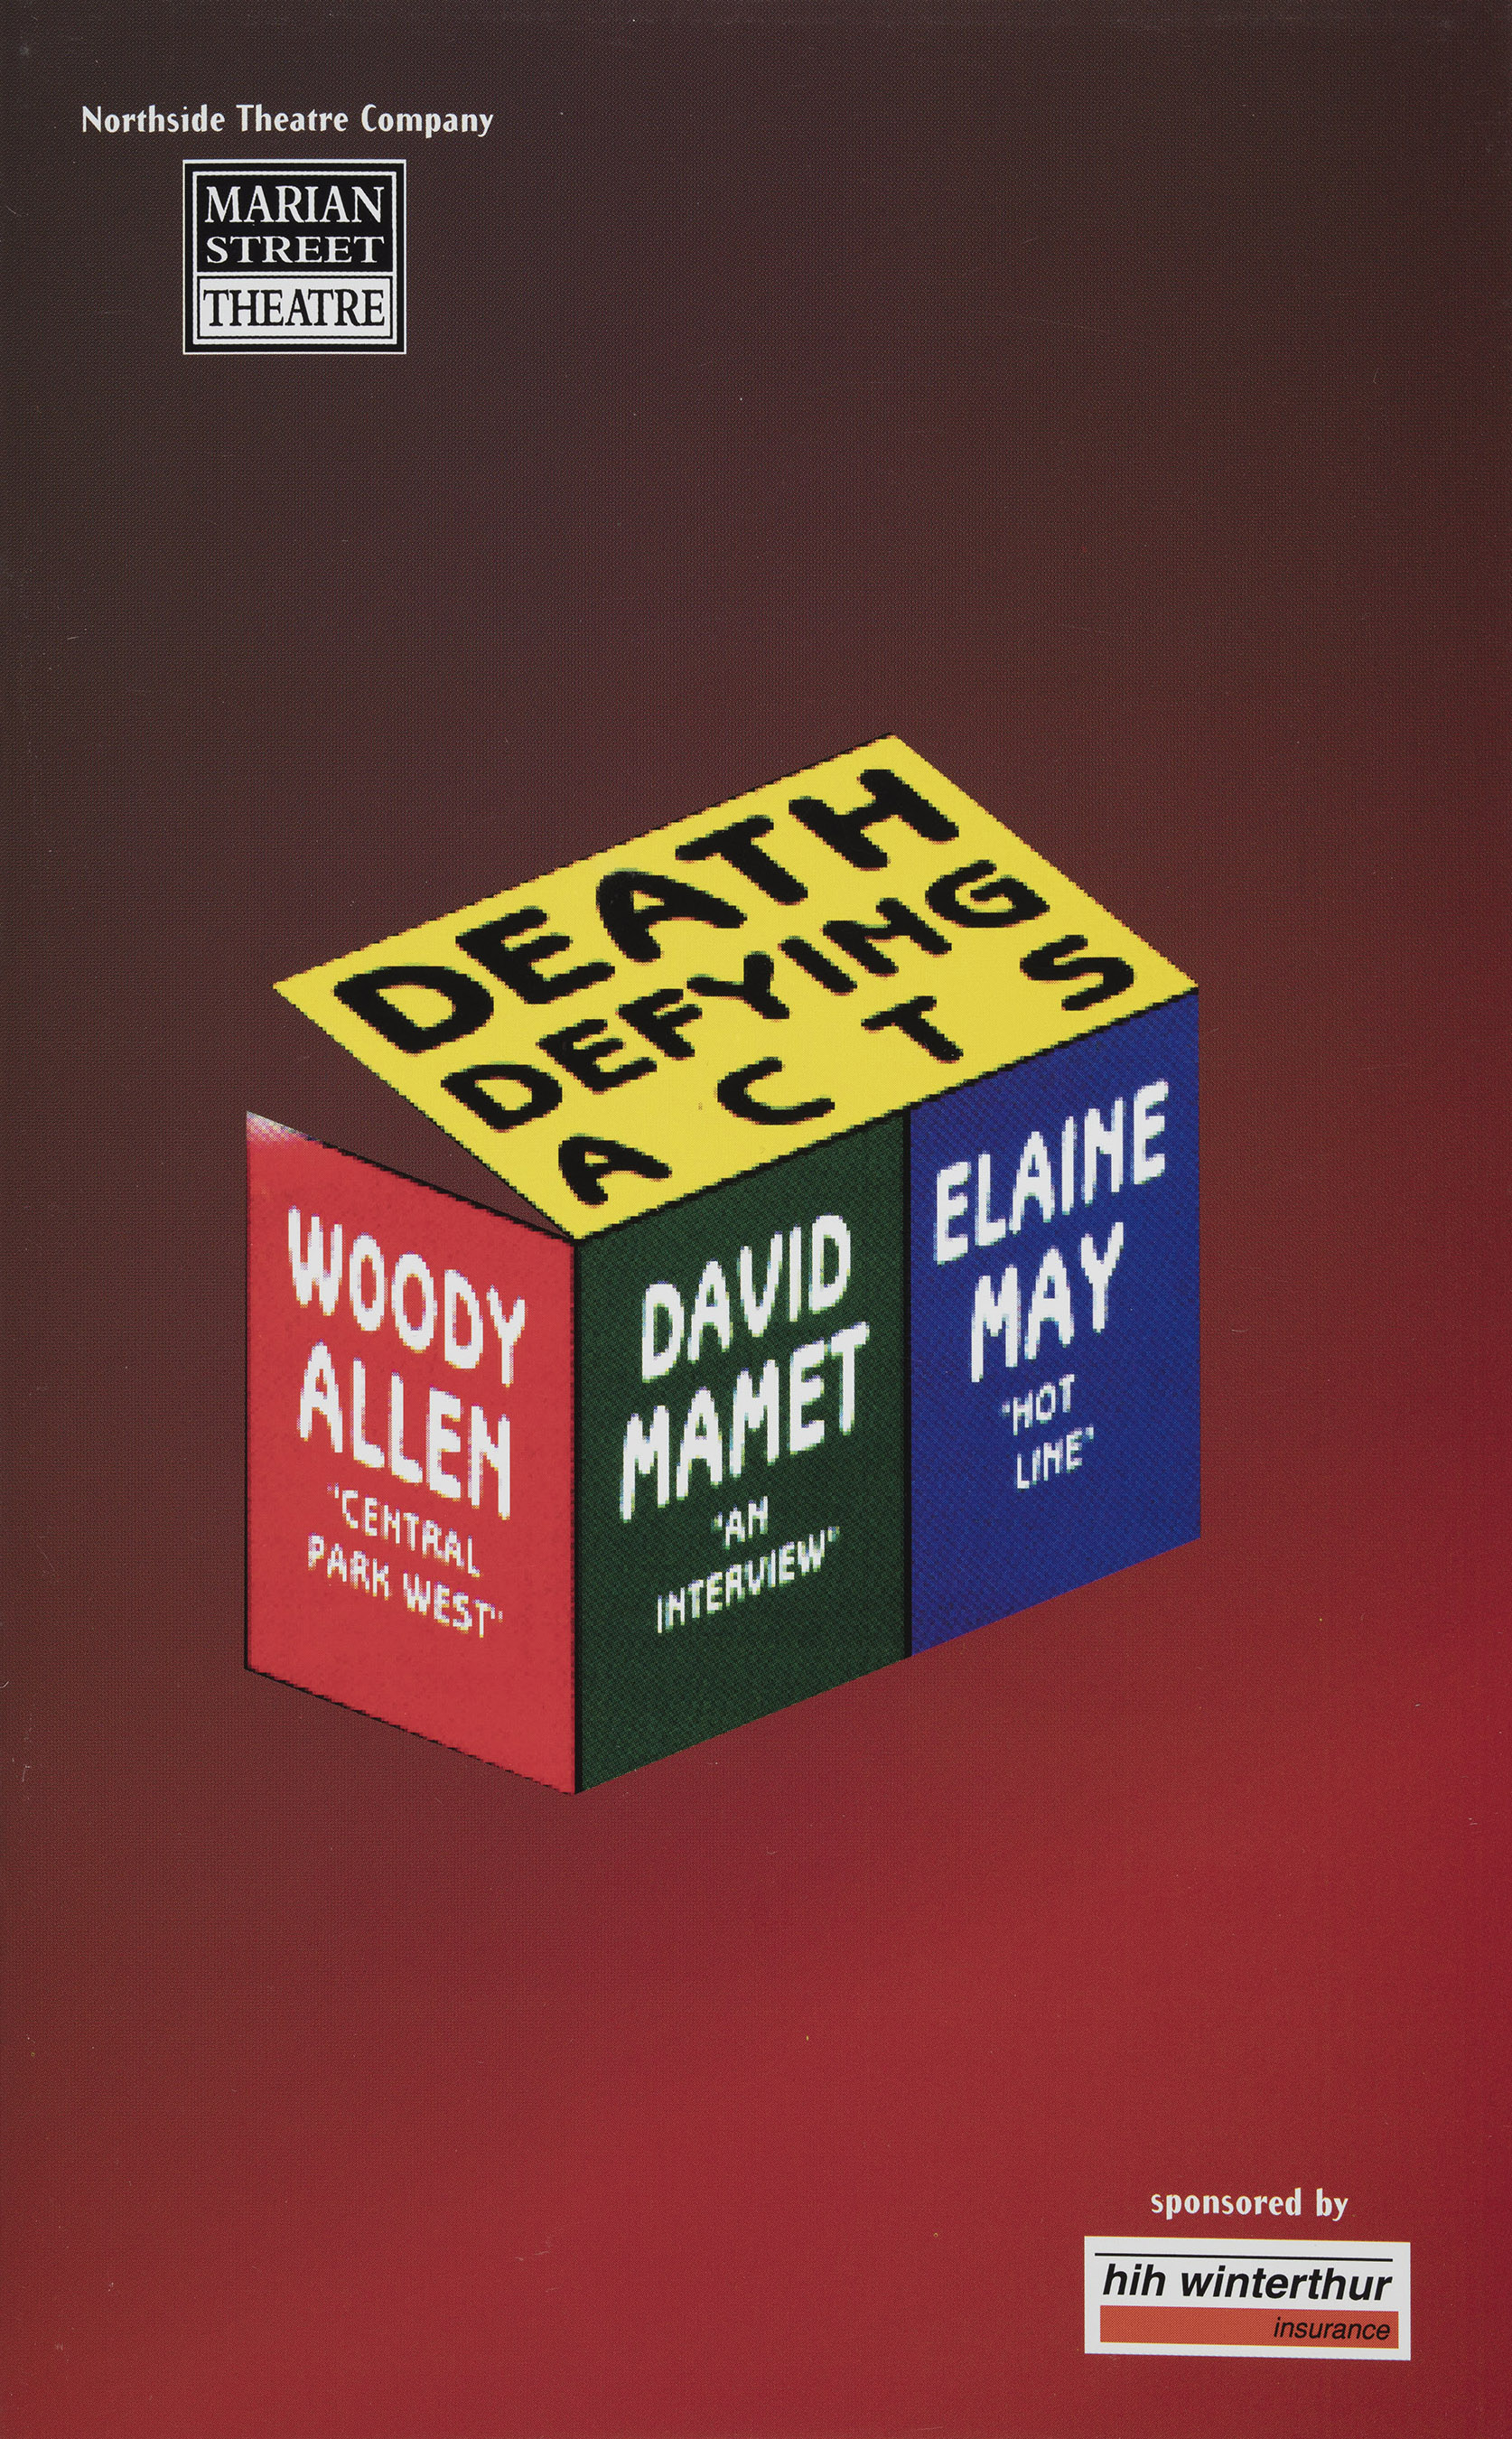 Program for Death Defying Acts, 1995 production, Marian Street Theatre records 1965–2002, box 8